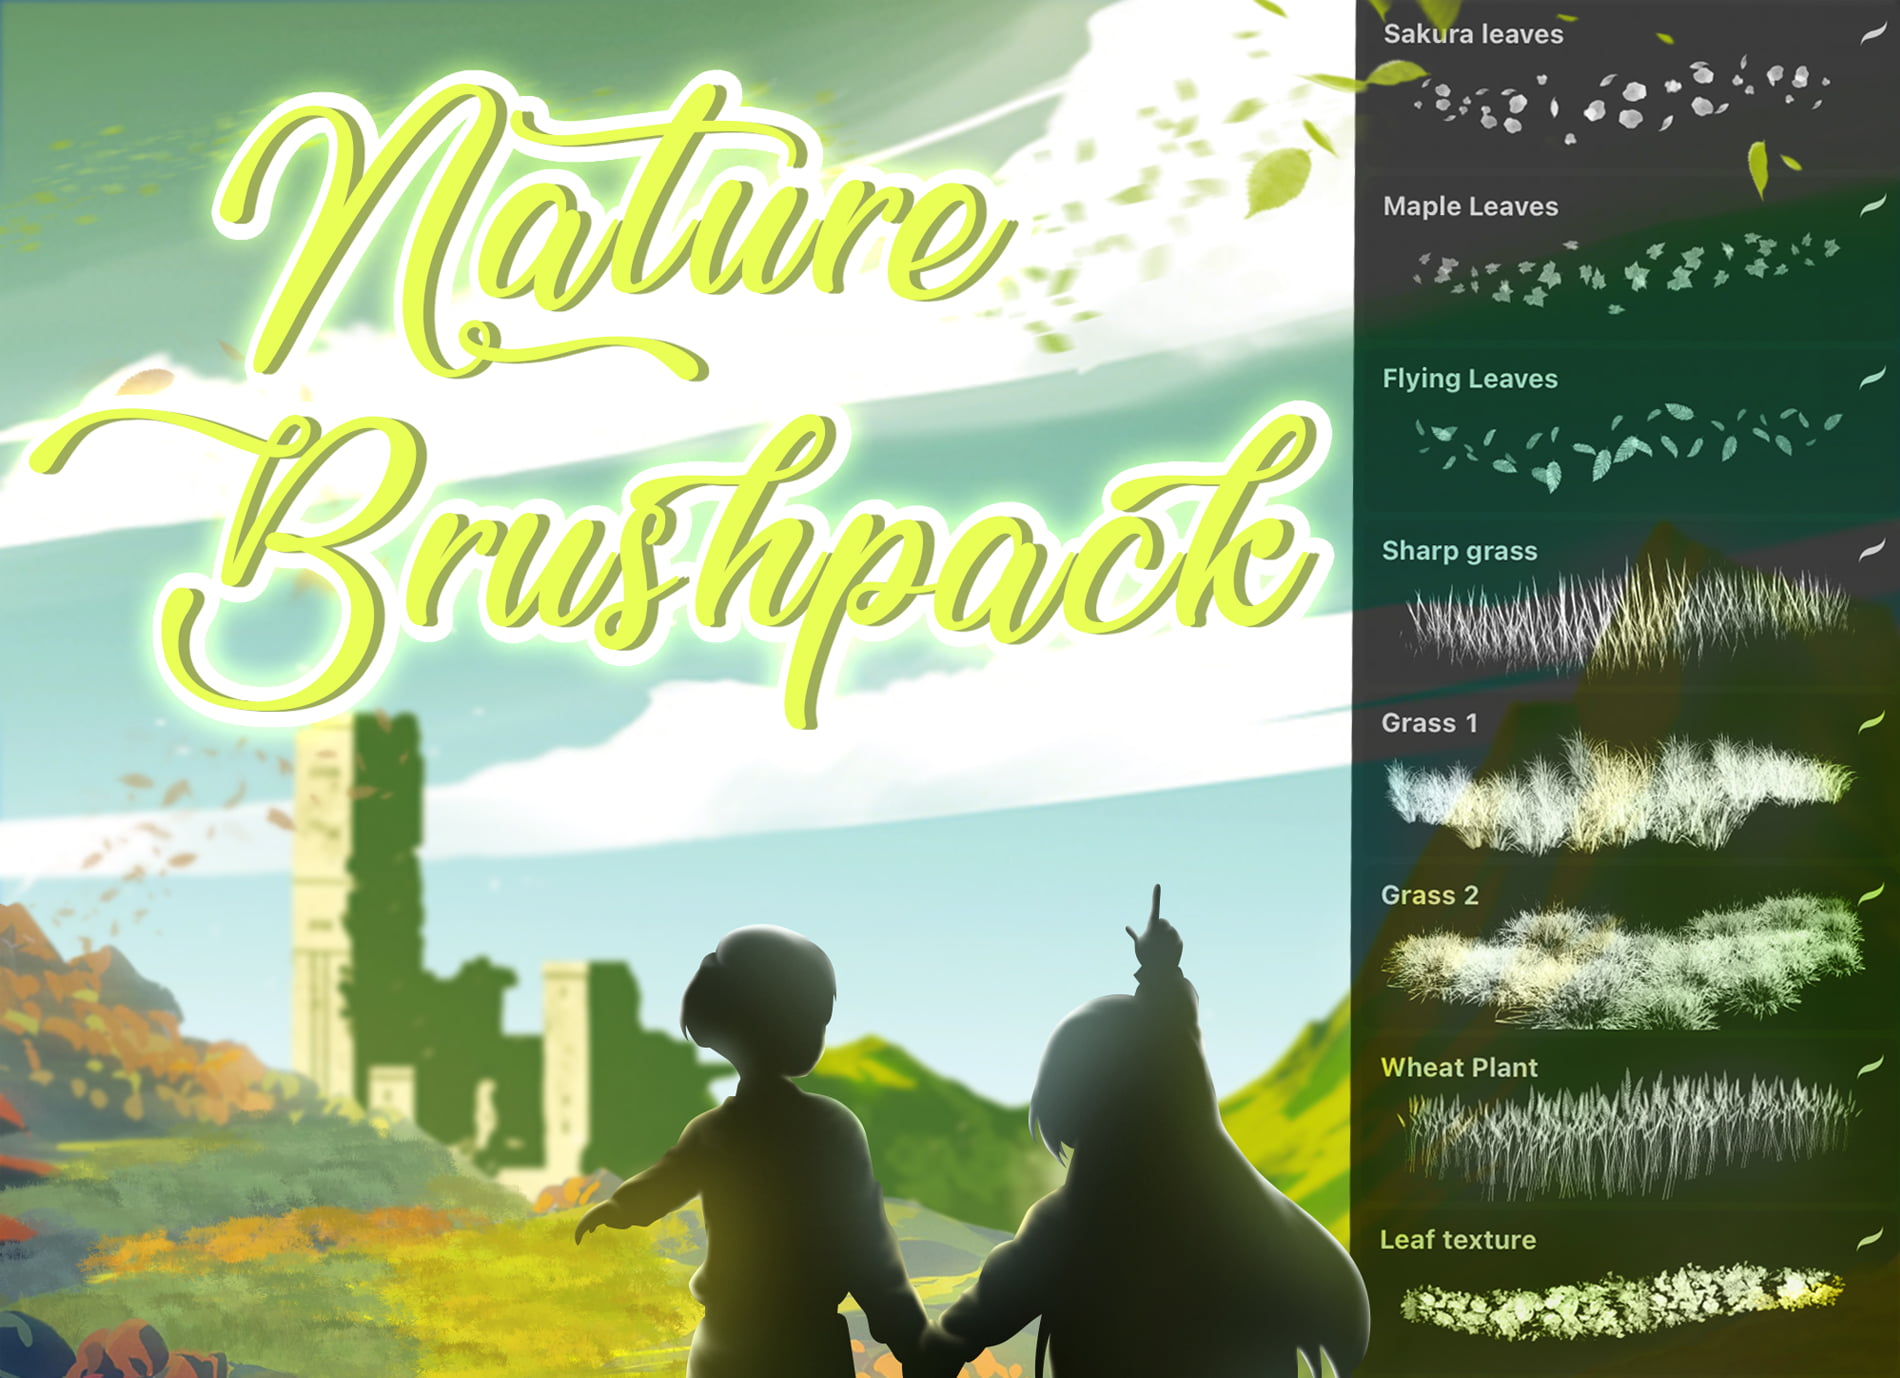 procreate nature brushes free download